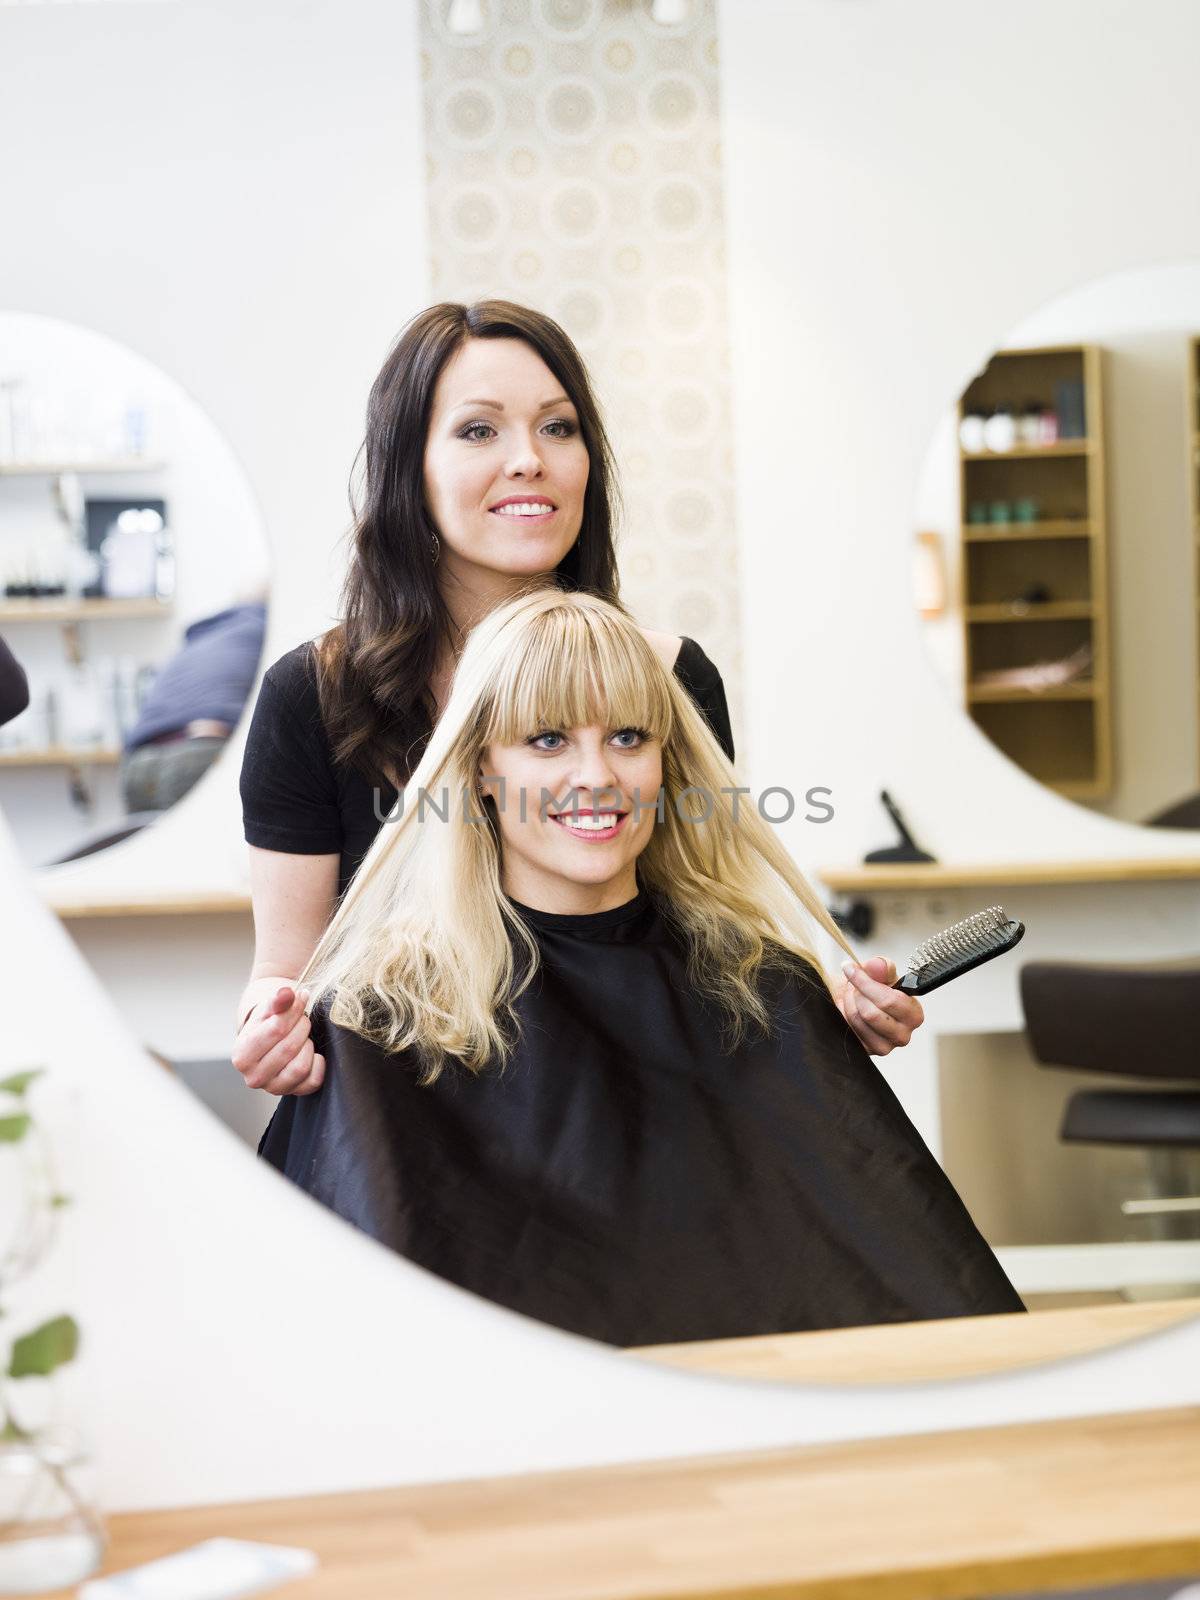 Hairdresser in action with blond customer close up